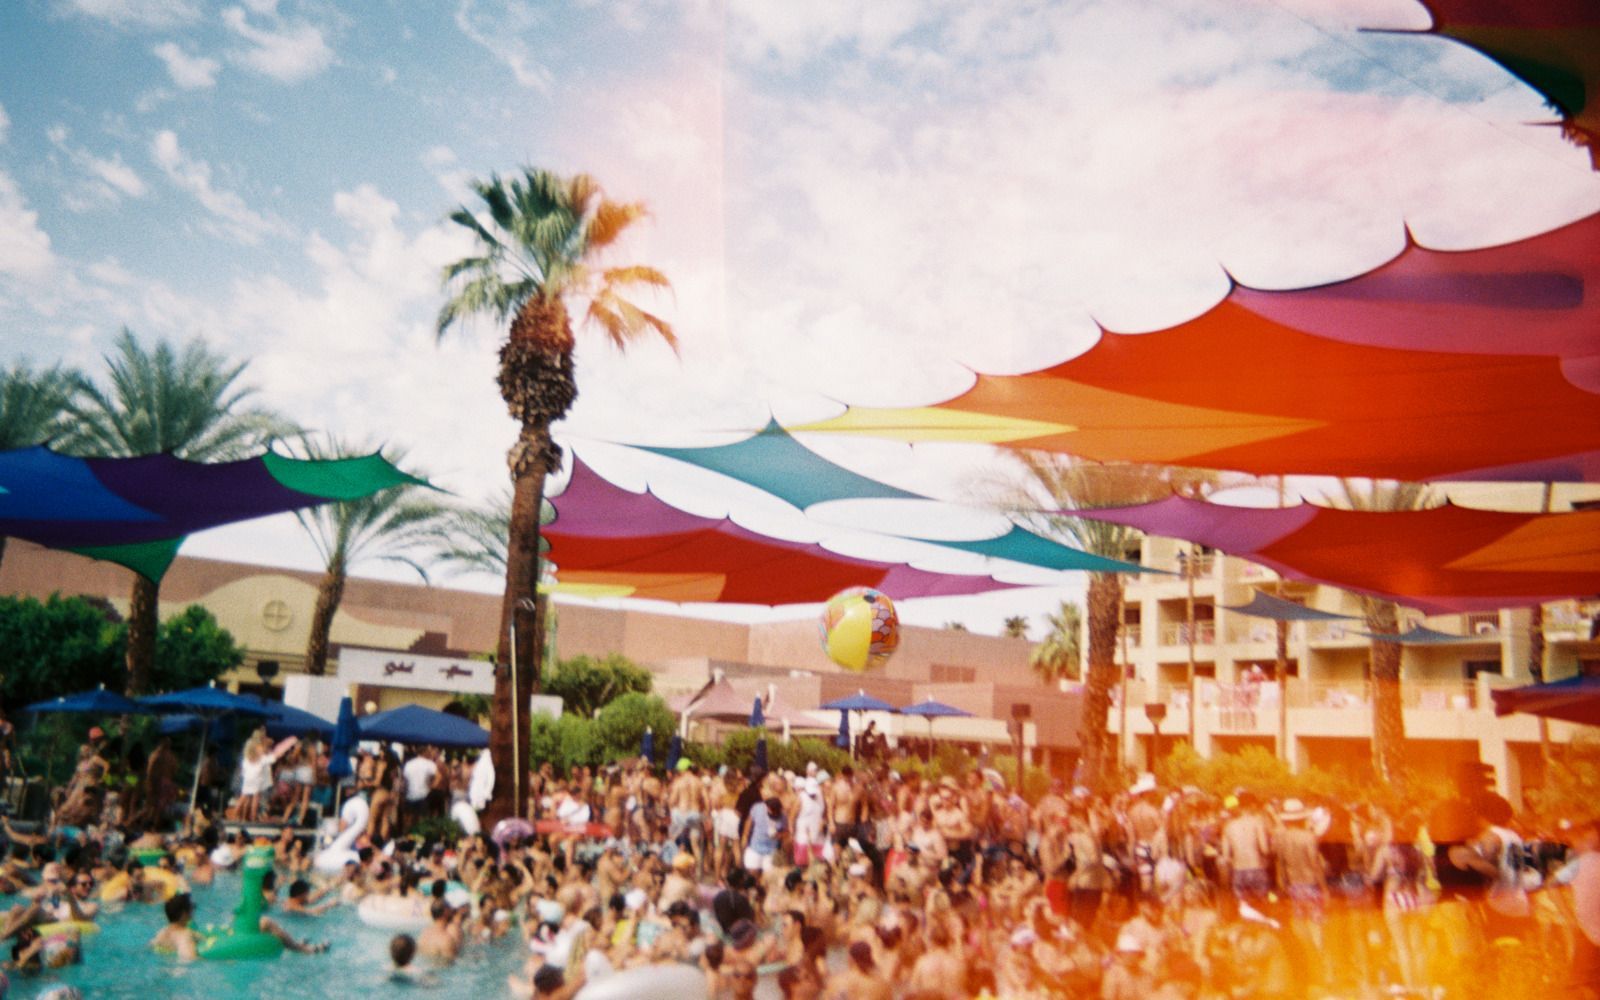 Splash House Brings Ibiza to Palm Springs A candid tour to one of California's best independent summer festivals